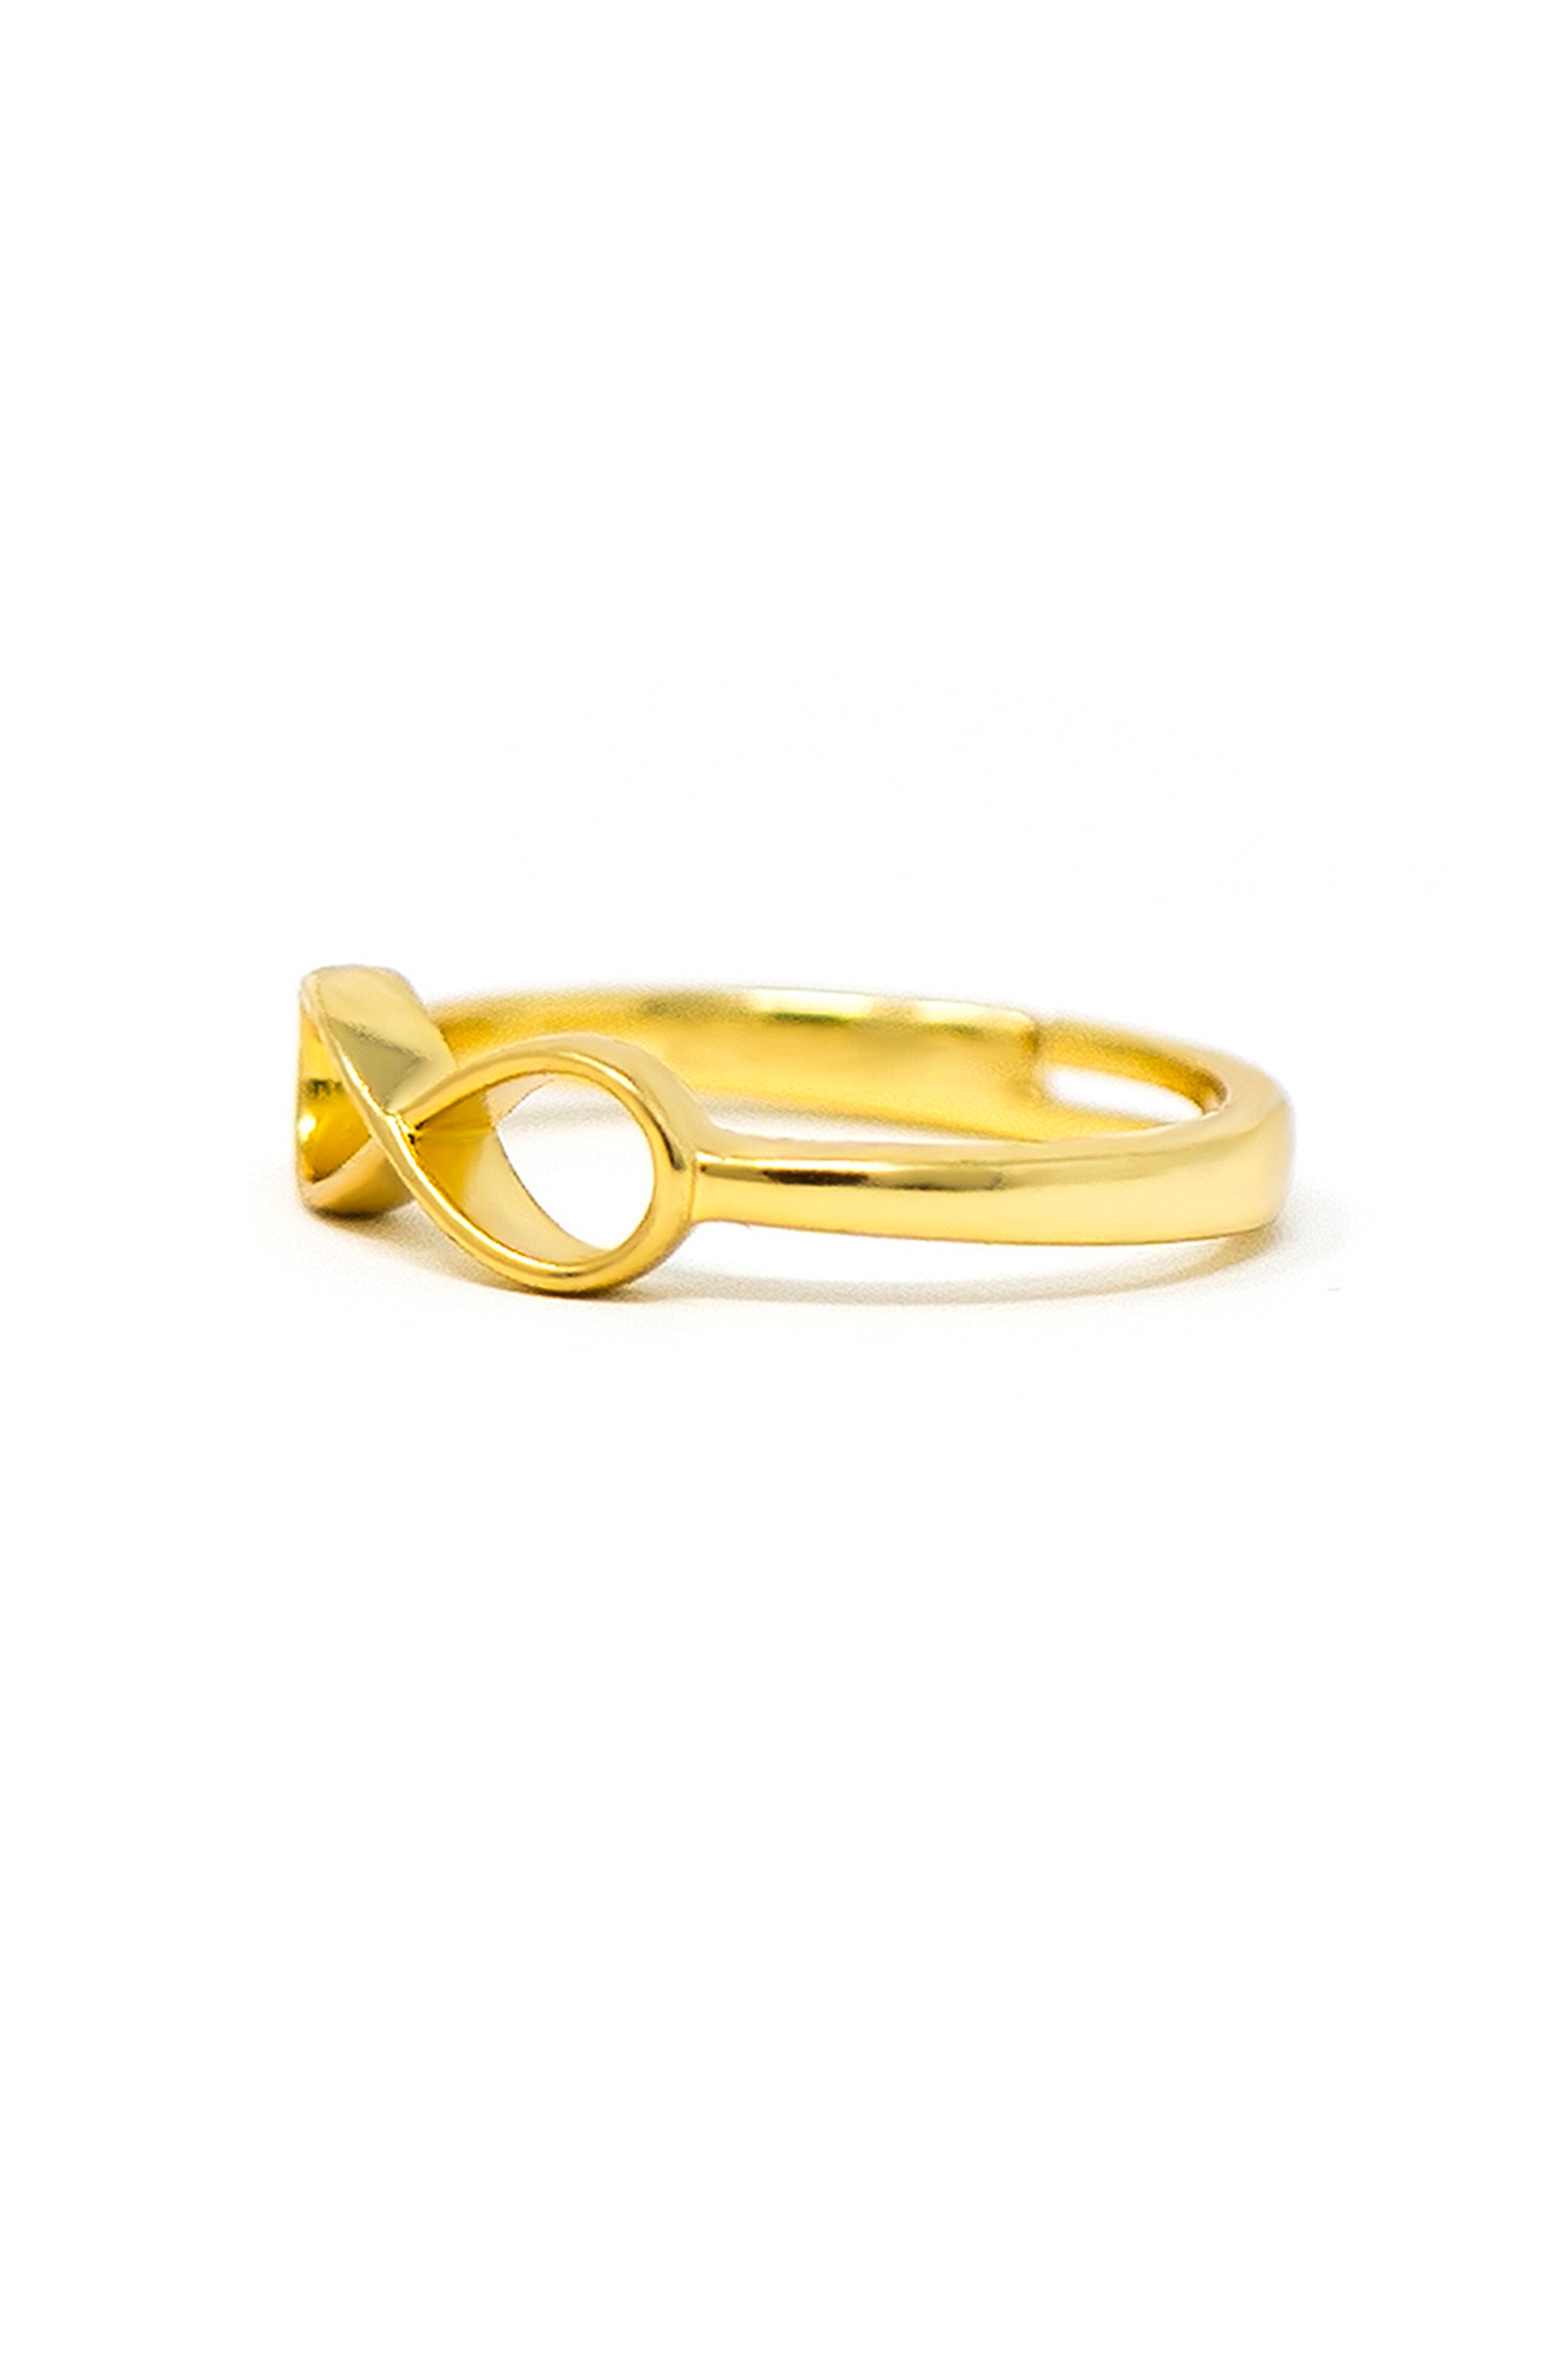 Pipa Bella by Nykaa Fashion Stylish Gold Infinity Evil Eye Ring for Women|  Adjustable Brass Ring fancy Jewellery and Gift Items suitable for all  occasions| Valentine's Day Gift : Amazon.in: Fashion